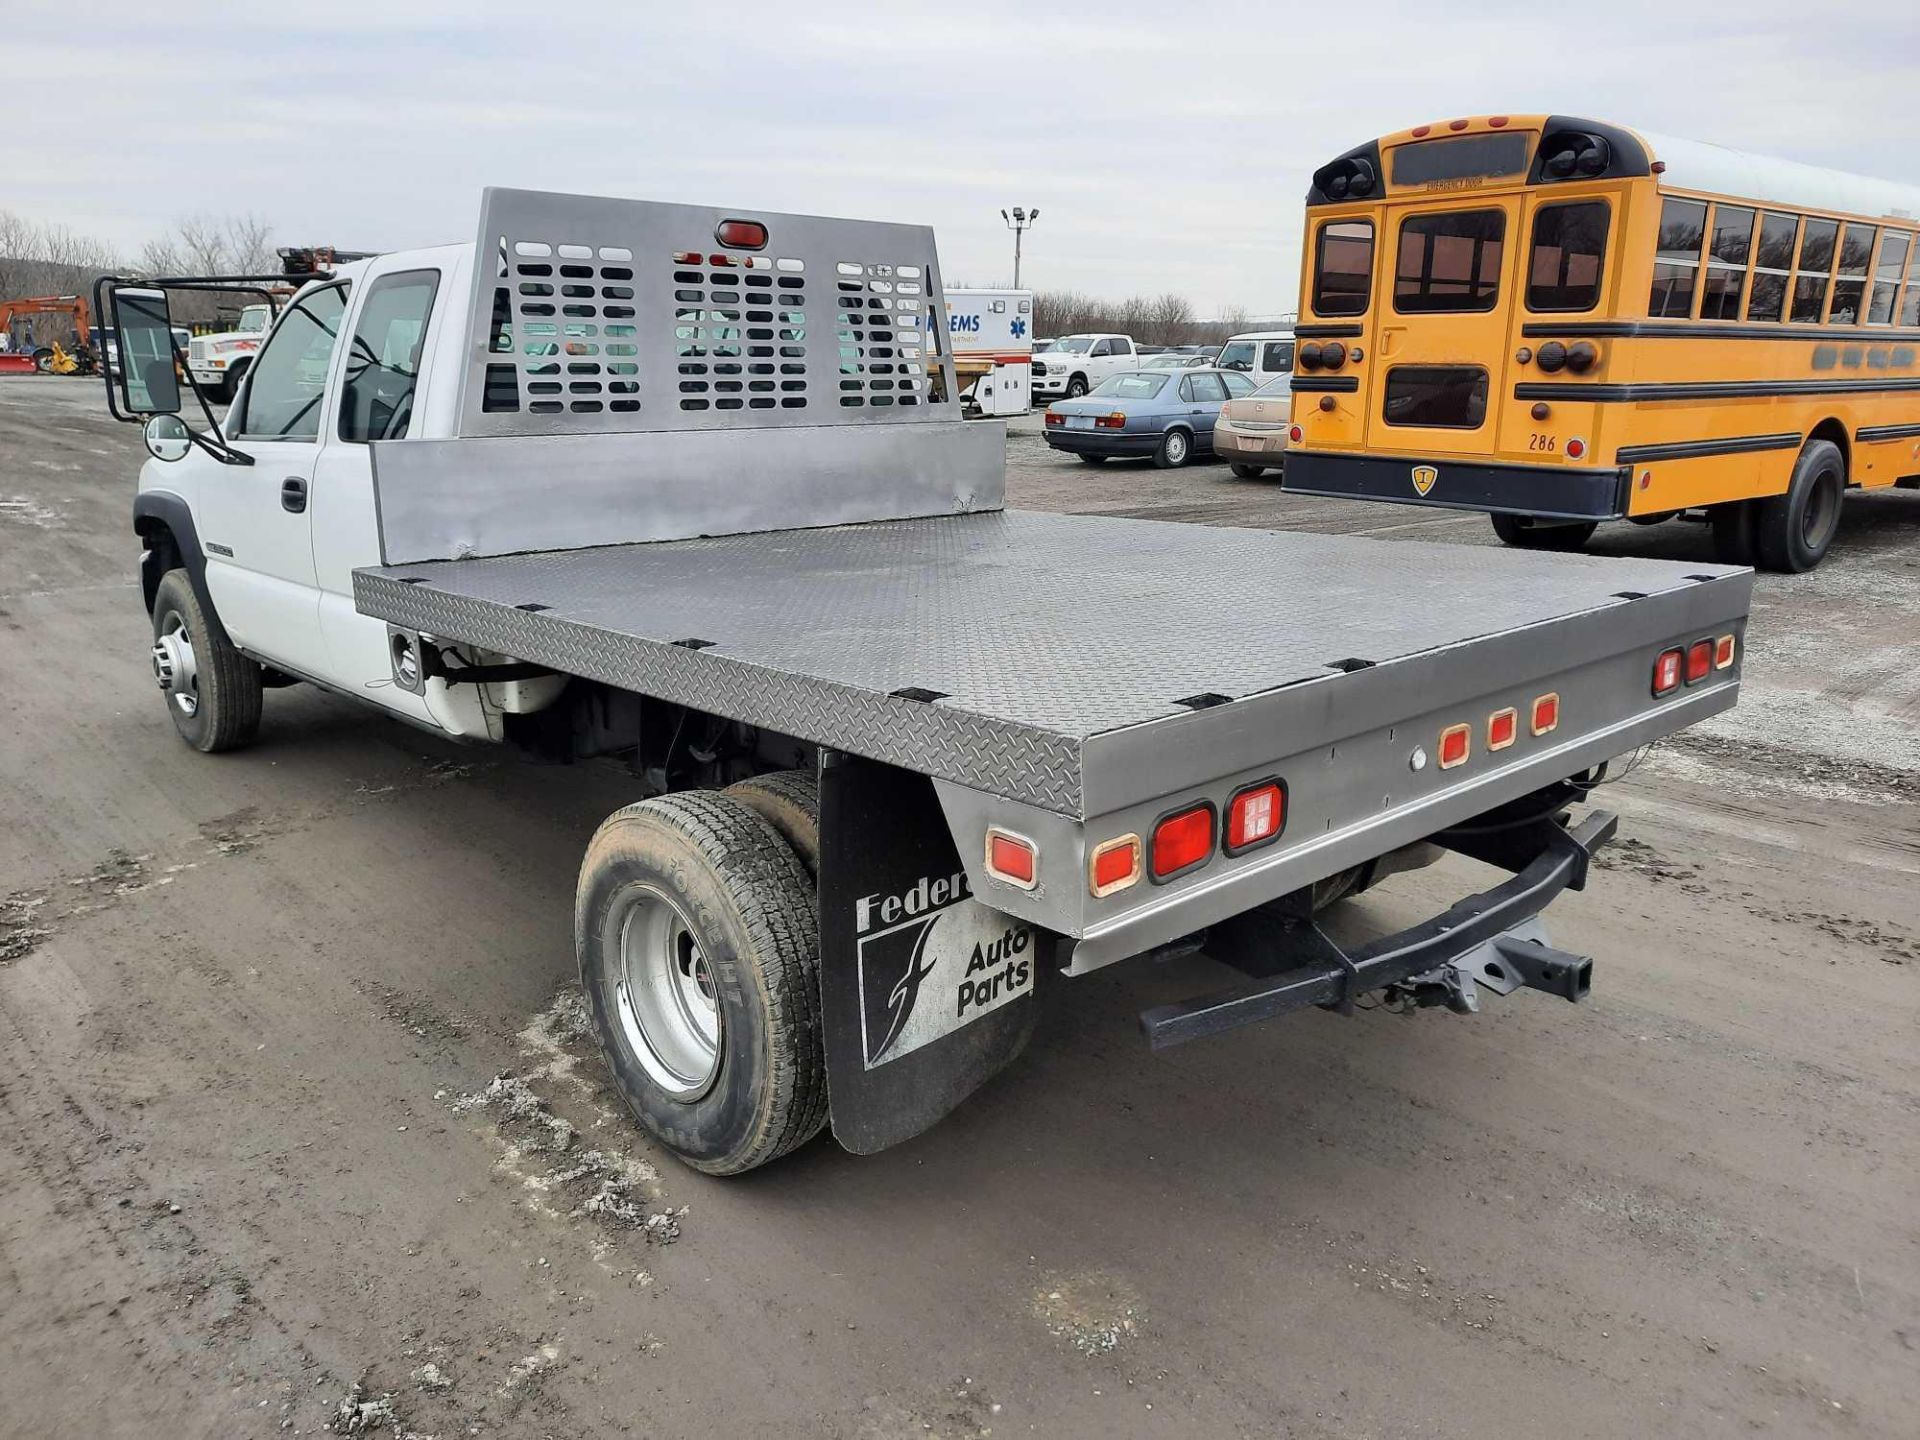 2007 GMC 3500 DUALLY FLATBED PICKUP TRUCK - Image 2 of 17